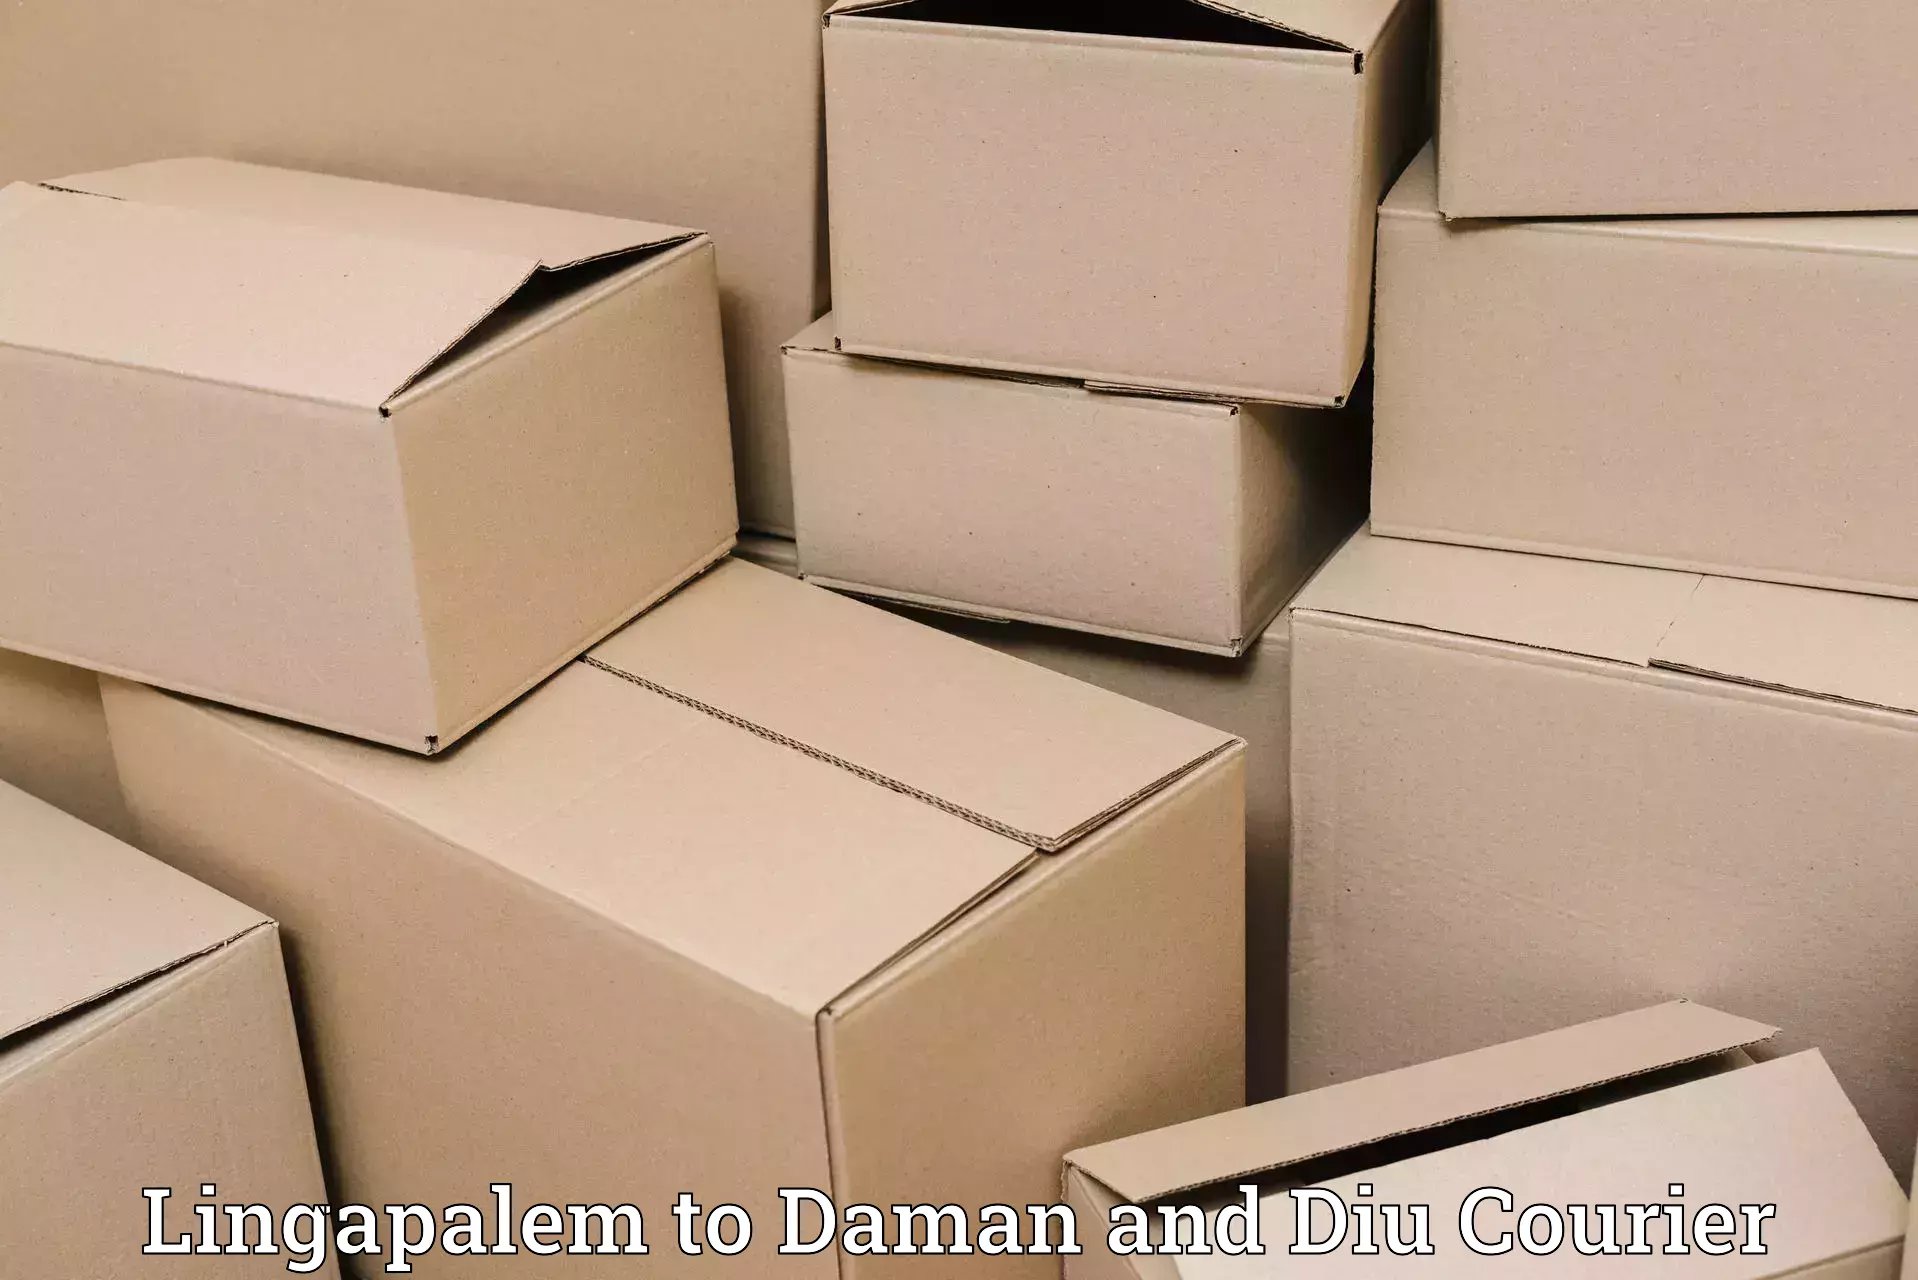 Customer-oriented courier services in Lingapalem to Daman